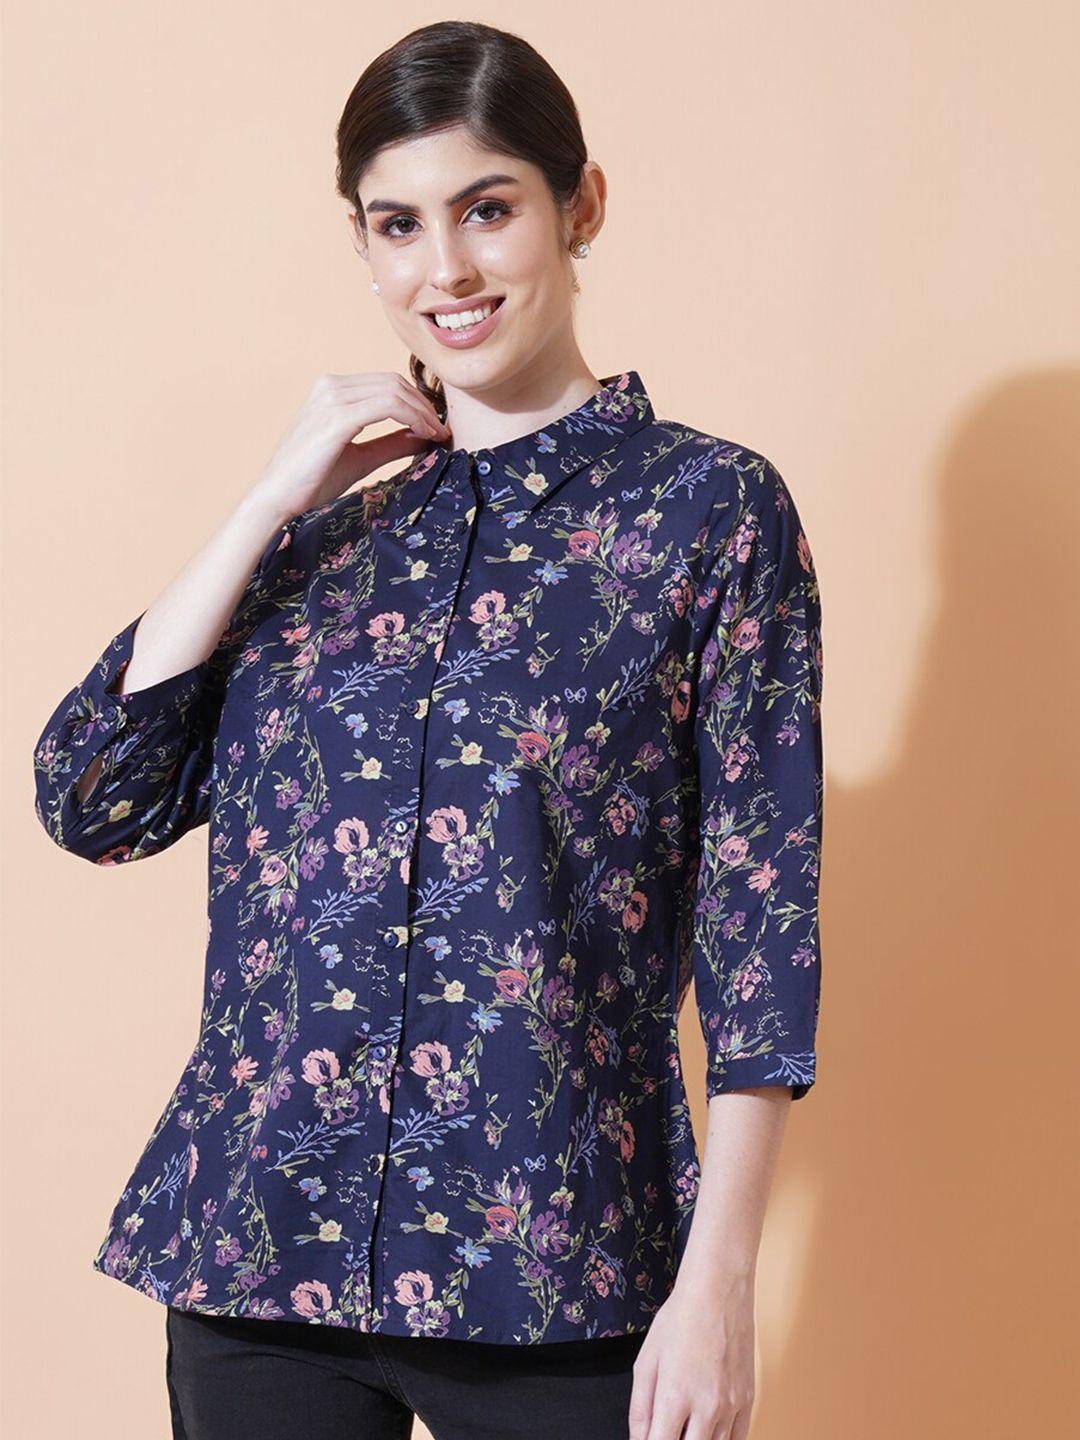 ix impression floral printed pure cotton shirt style top